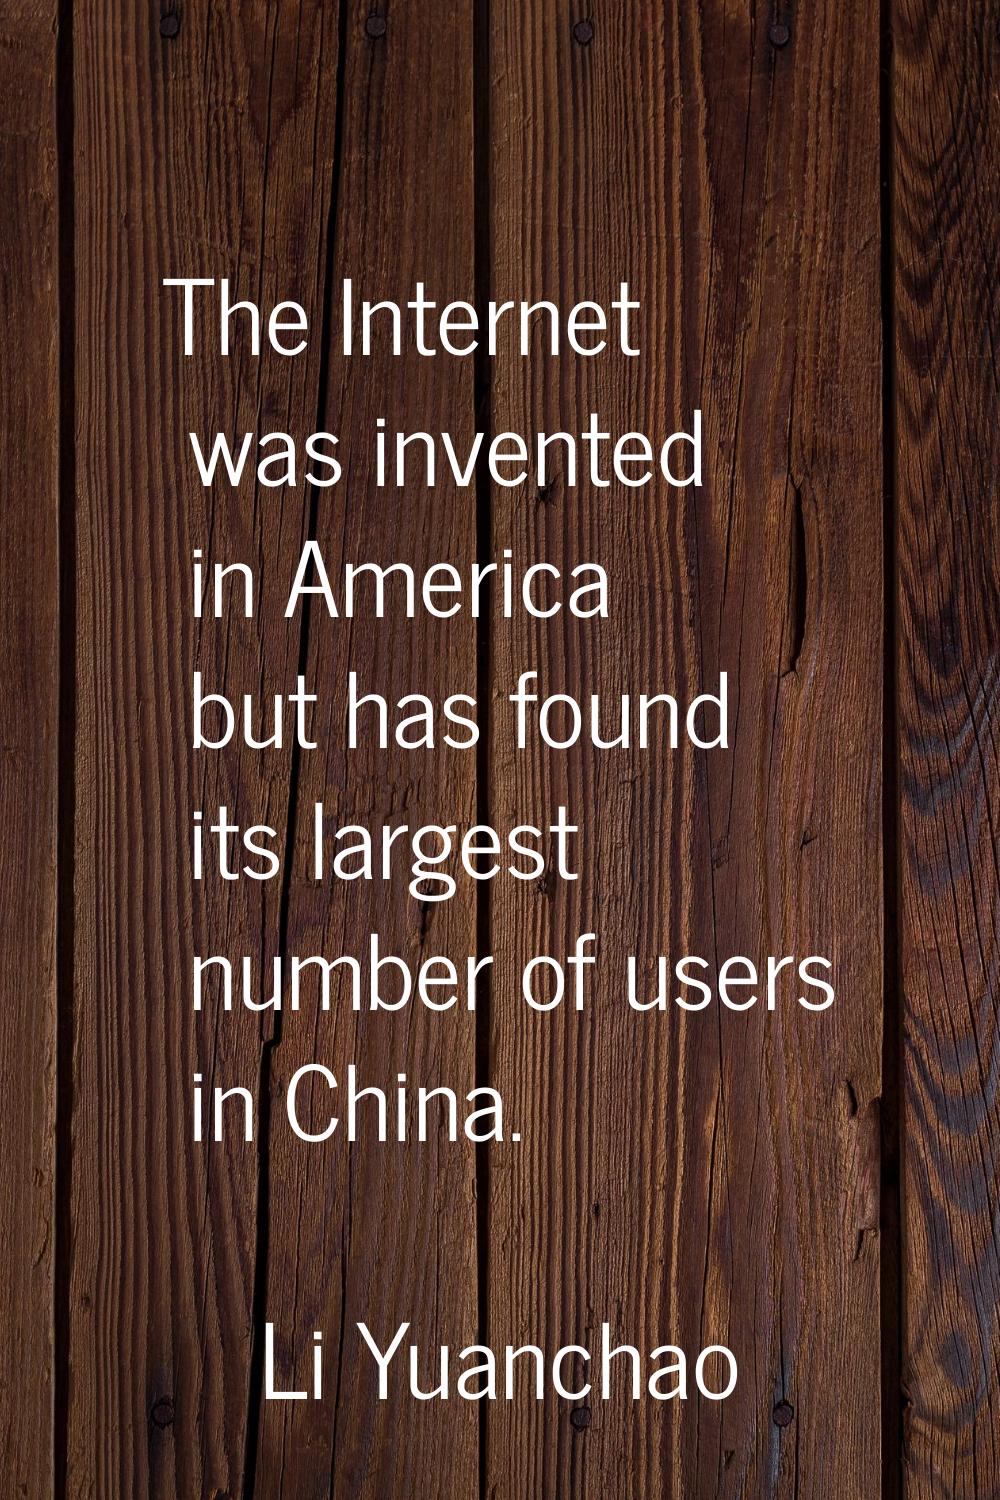 The Internet was invented in America but has found its largest number of users in China.